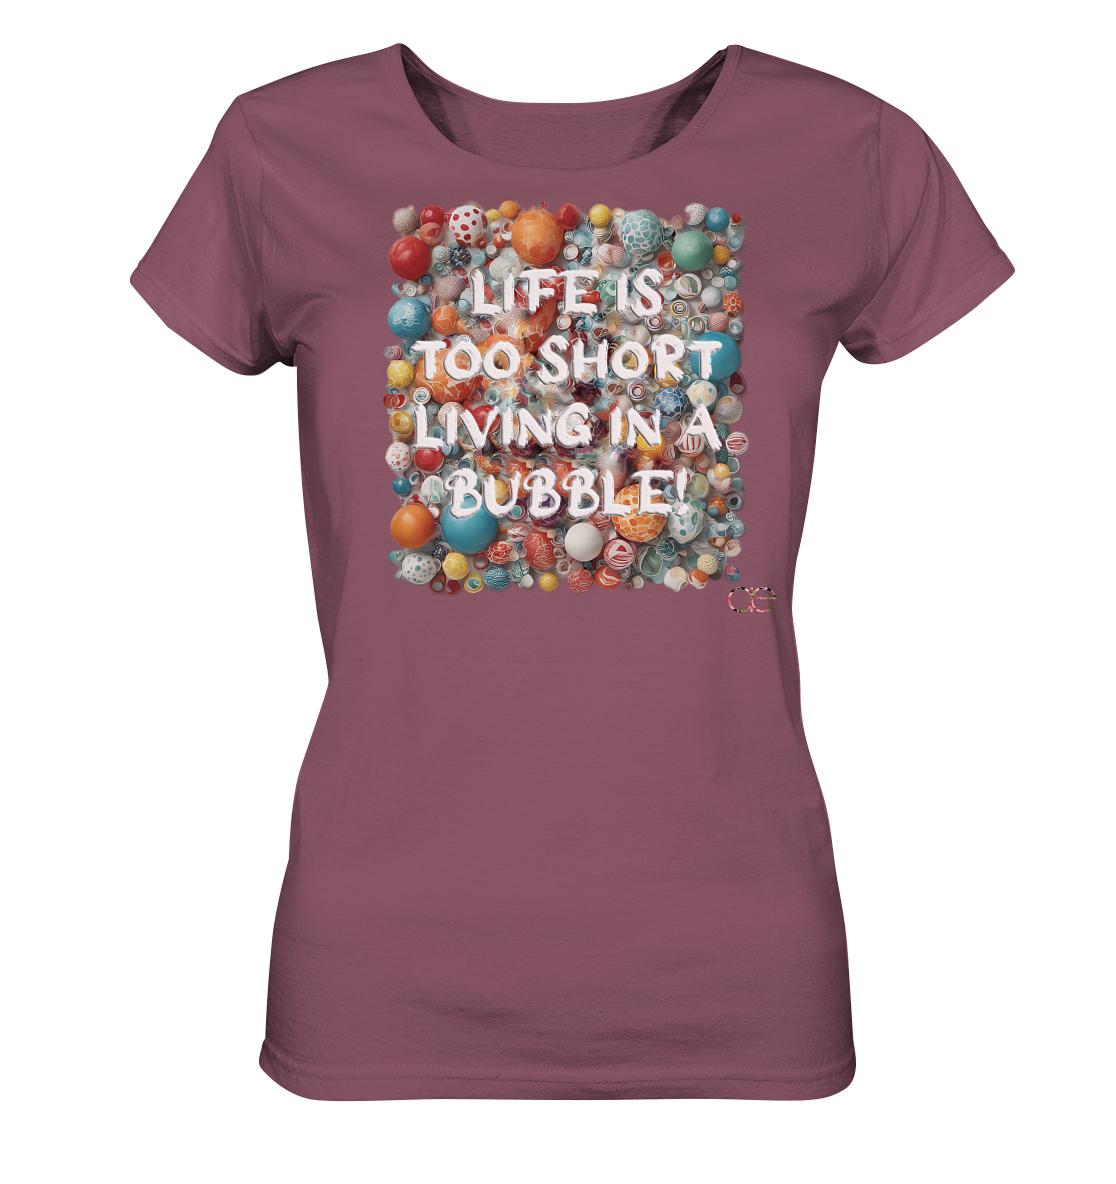 LIFE IS TOO SHORT LIVING IN A BUBBLE  - Ladies Organic Shirt